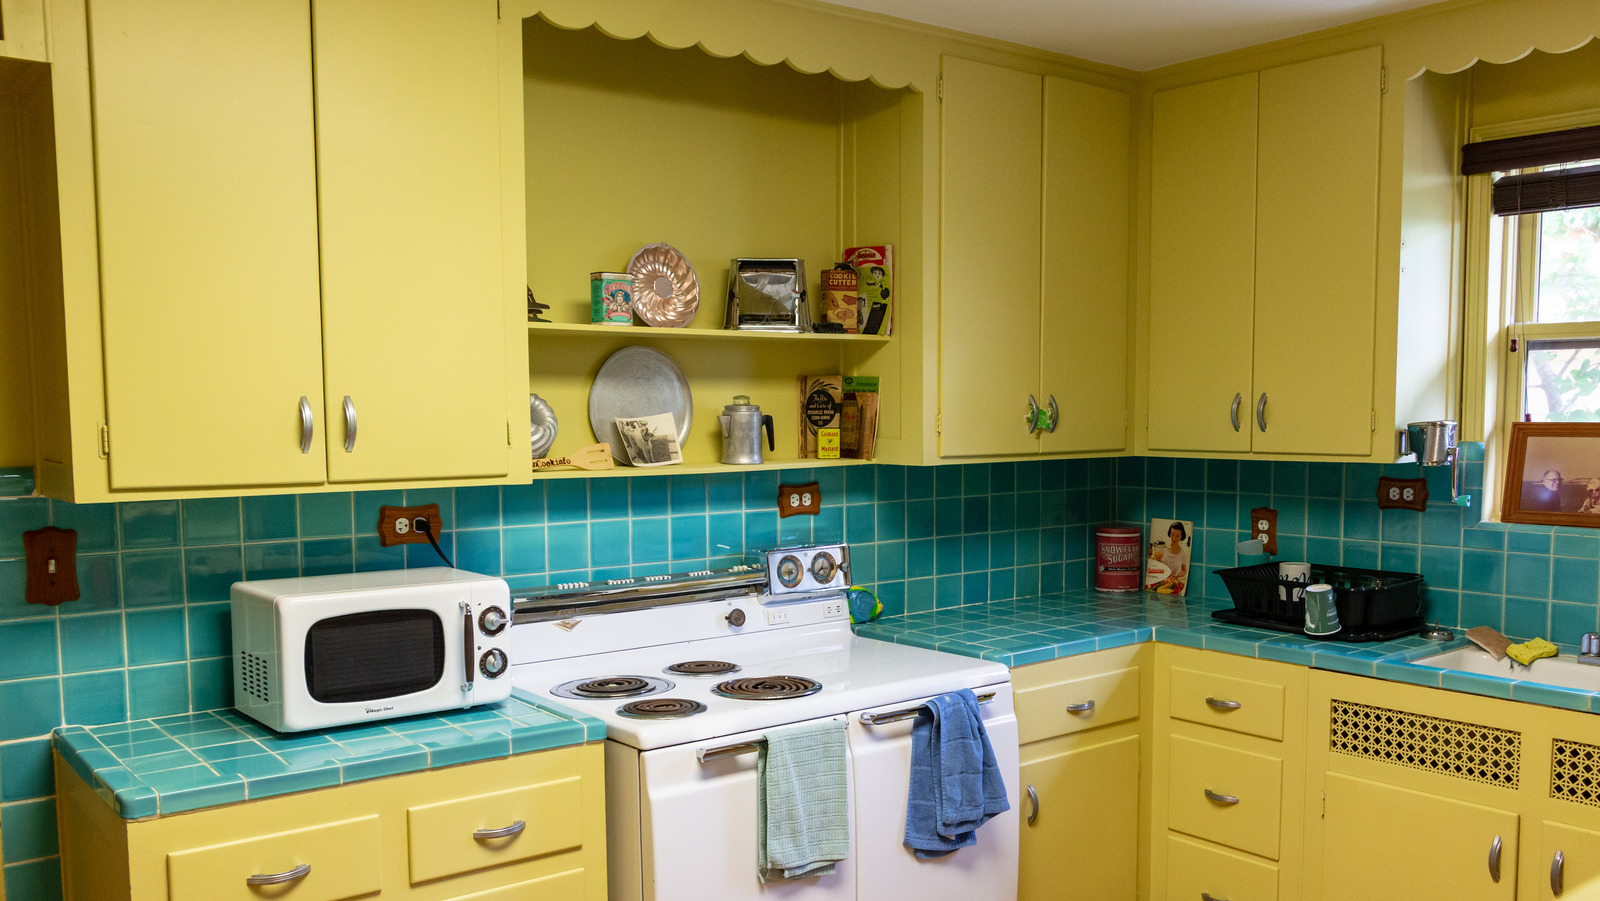 This Vintage Pink Kitchen Is Pure Joy